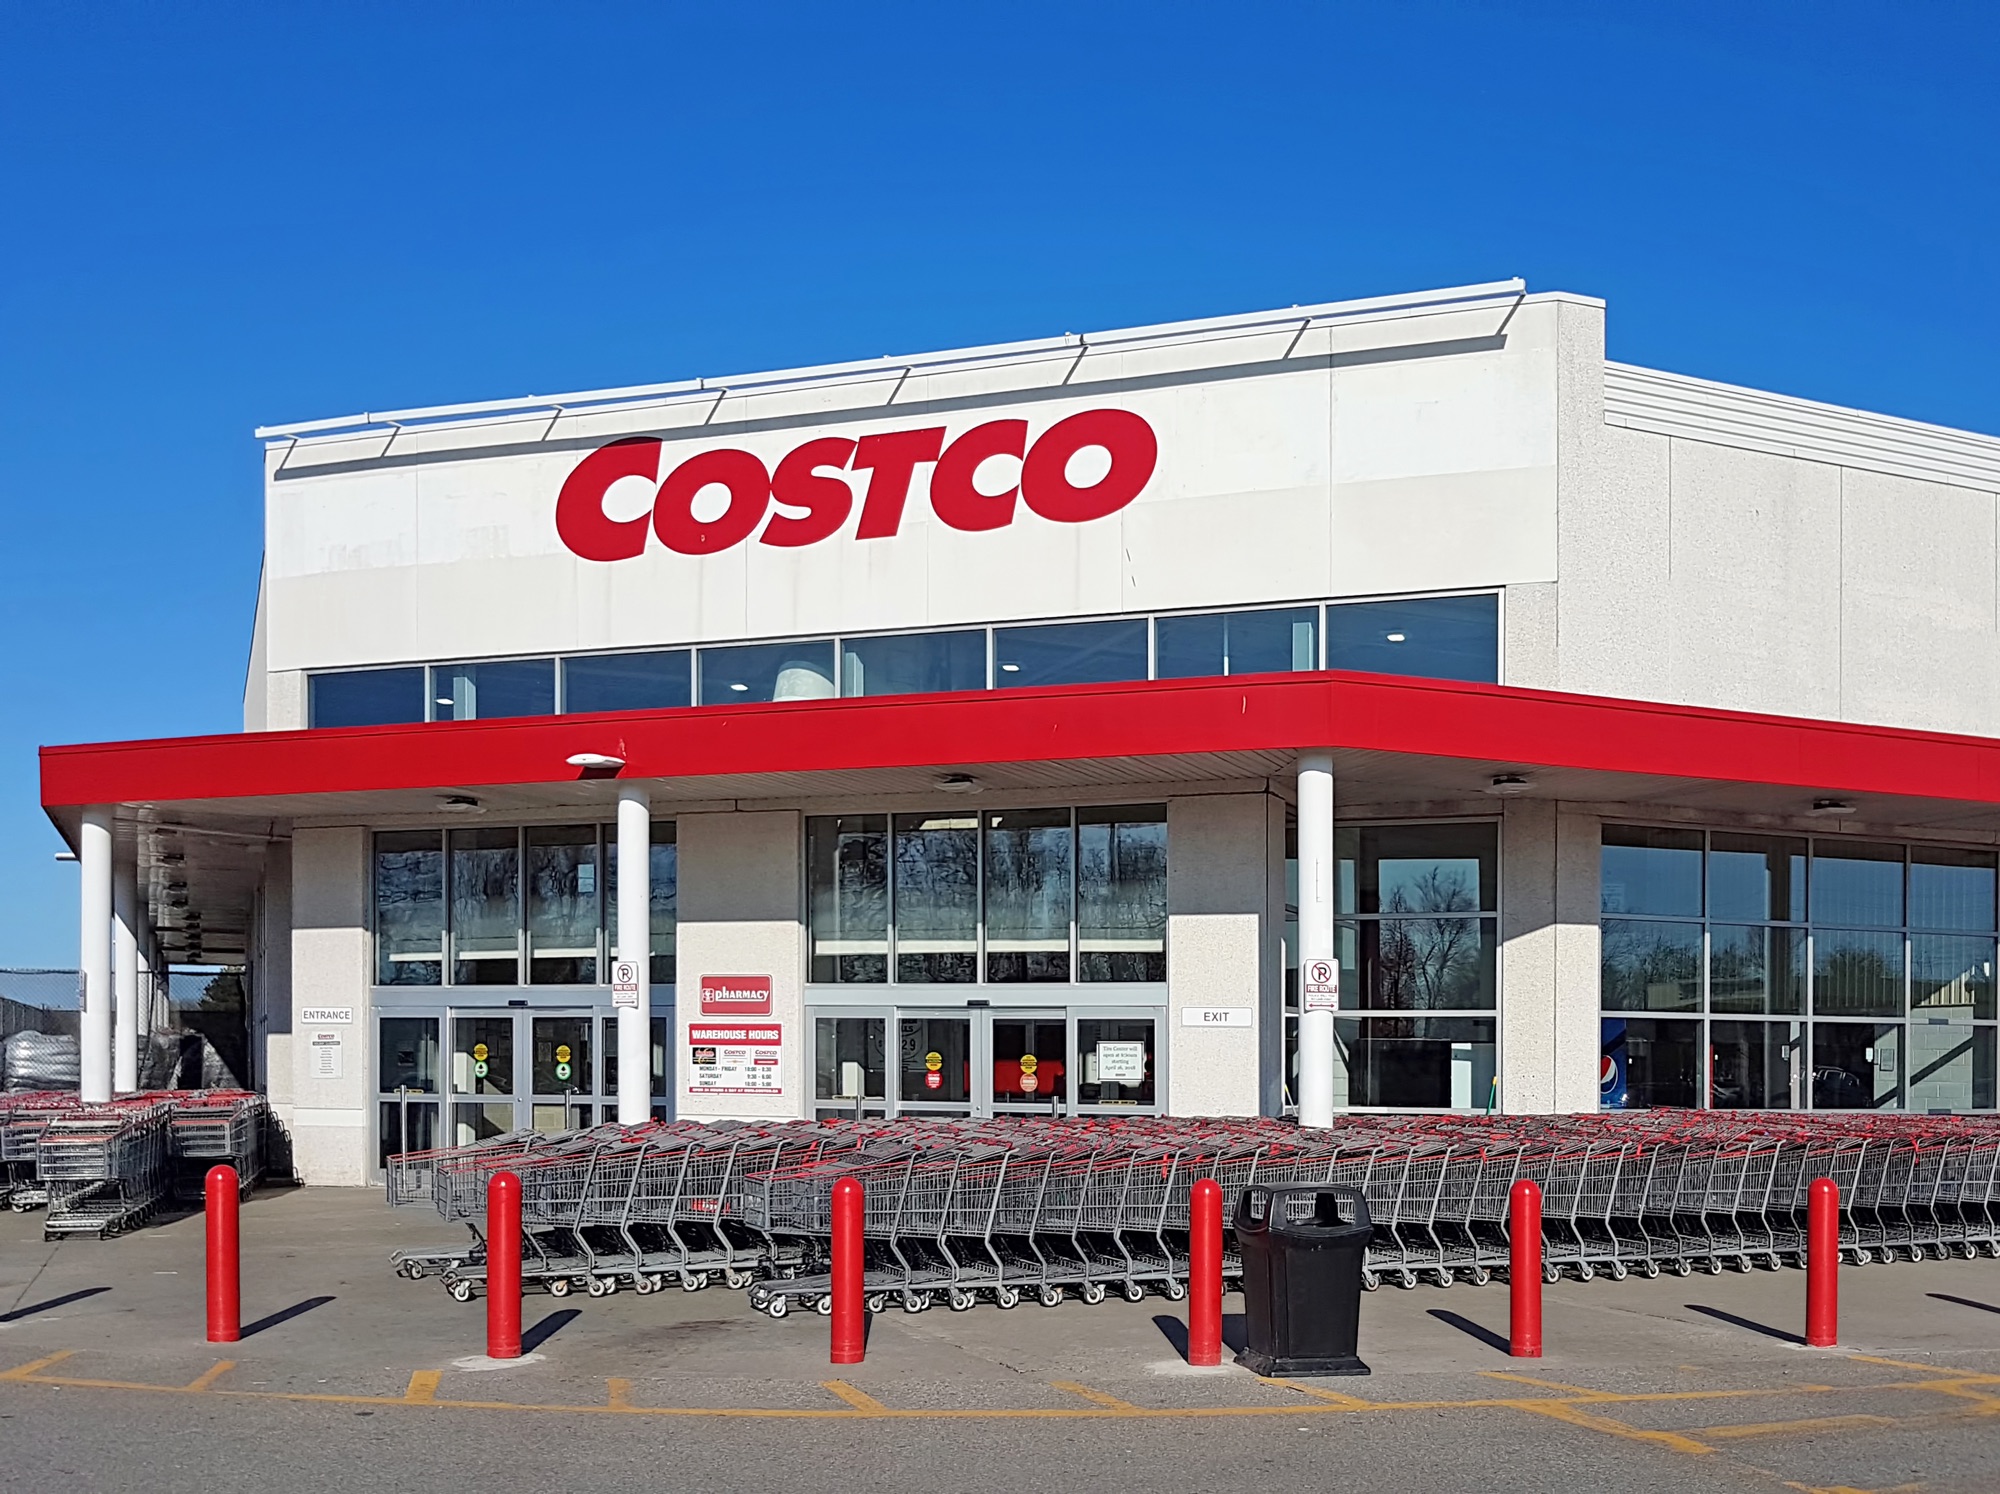 10 Reasons Everyone is Obsessed with Costco and Sam’s Club